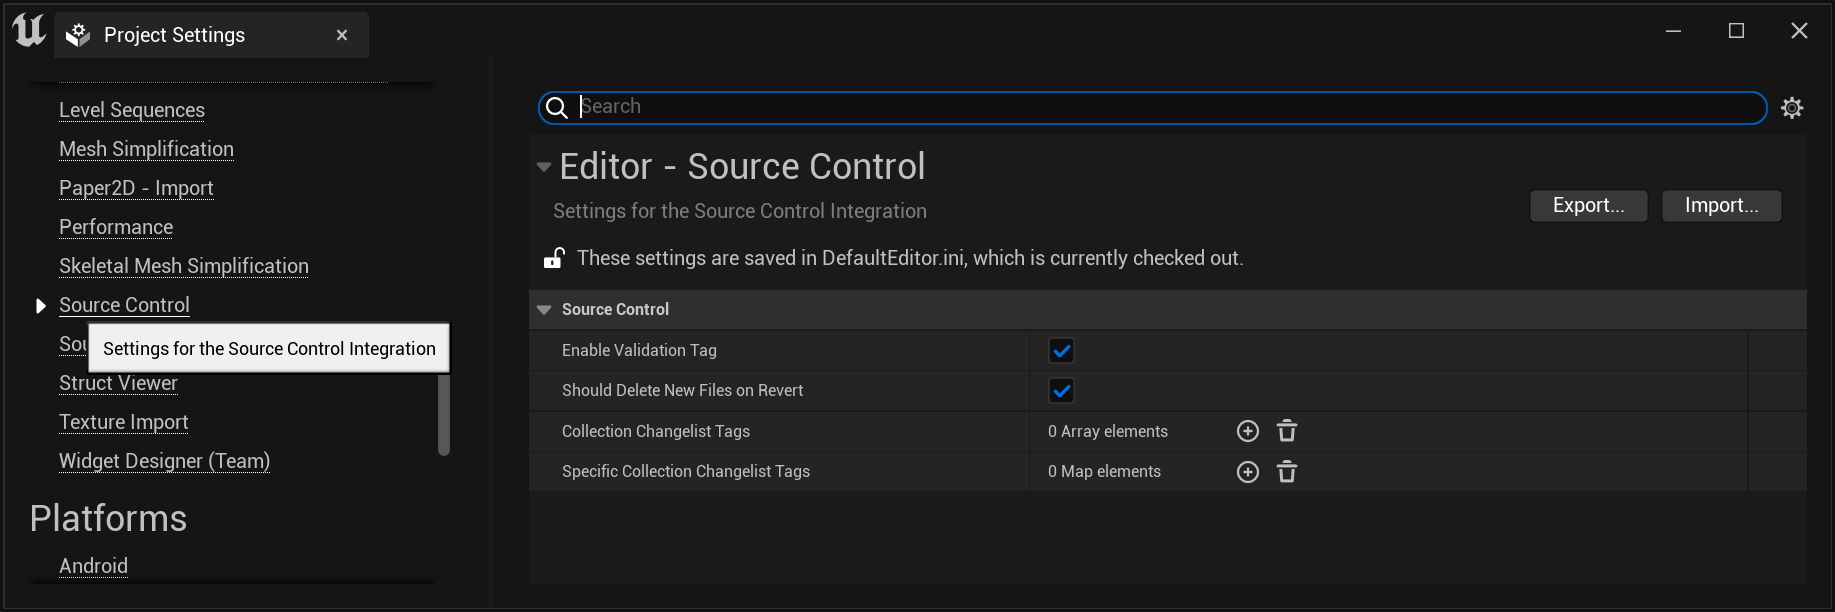 Project Settings - Source Control